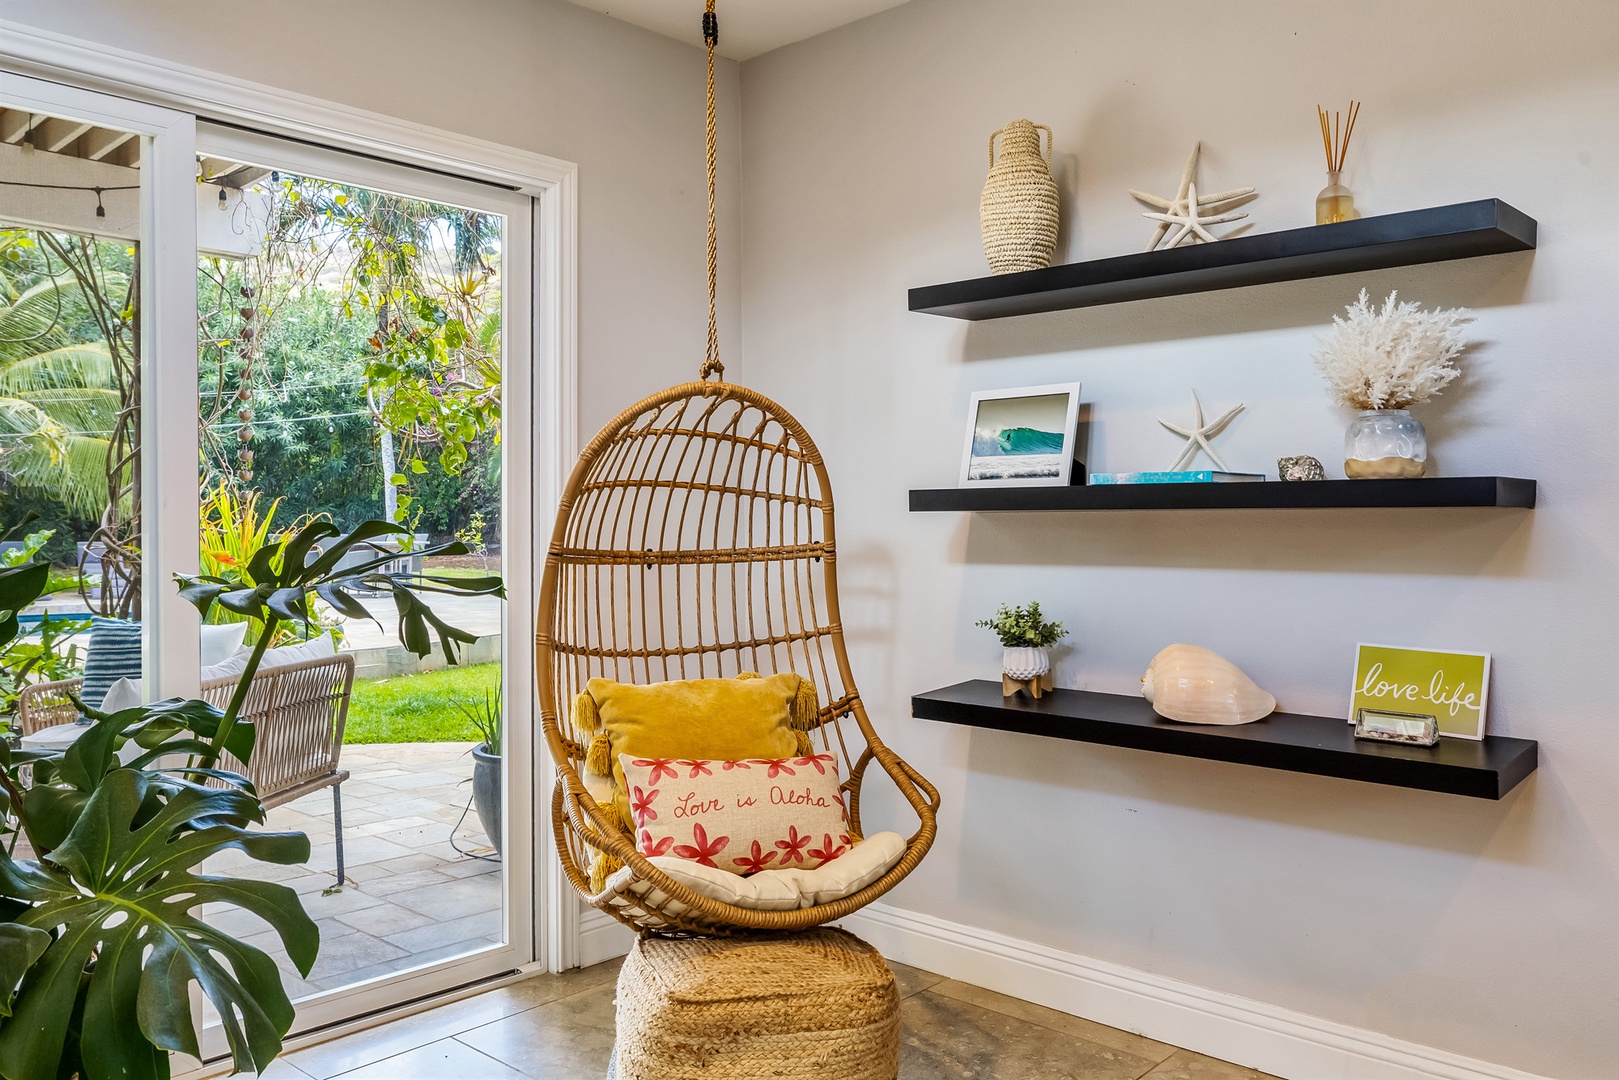 Honolulu Vacation Rentals, Hale Ho'omaha - Enjoy a beautiful morning with a cup off coffee or your favorite book in the hanging chair